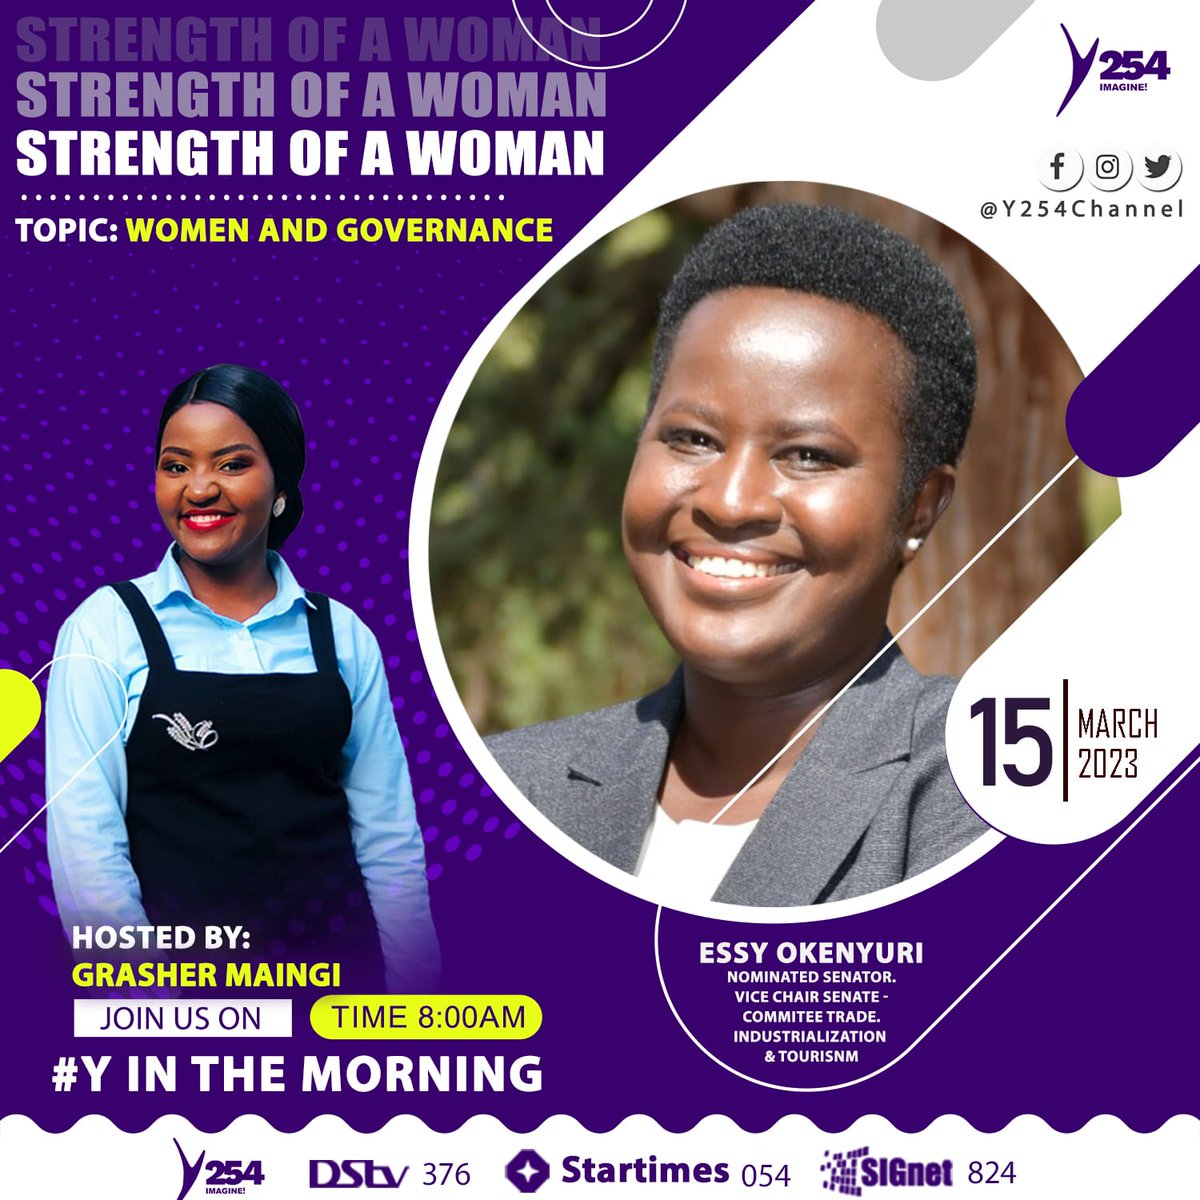 This morning Senator @essyokenyuri  will be Live from 0800hrs  on this Youth Channel @Y254Channel hosted by Grasher Maingi. Let's get tuned And  Learn  About Woman and Governance 
#WCW 
#YInTheMorning